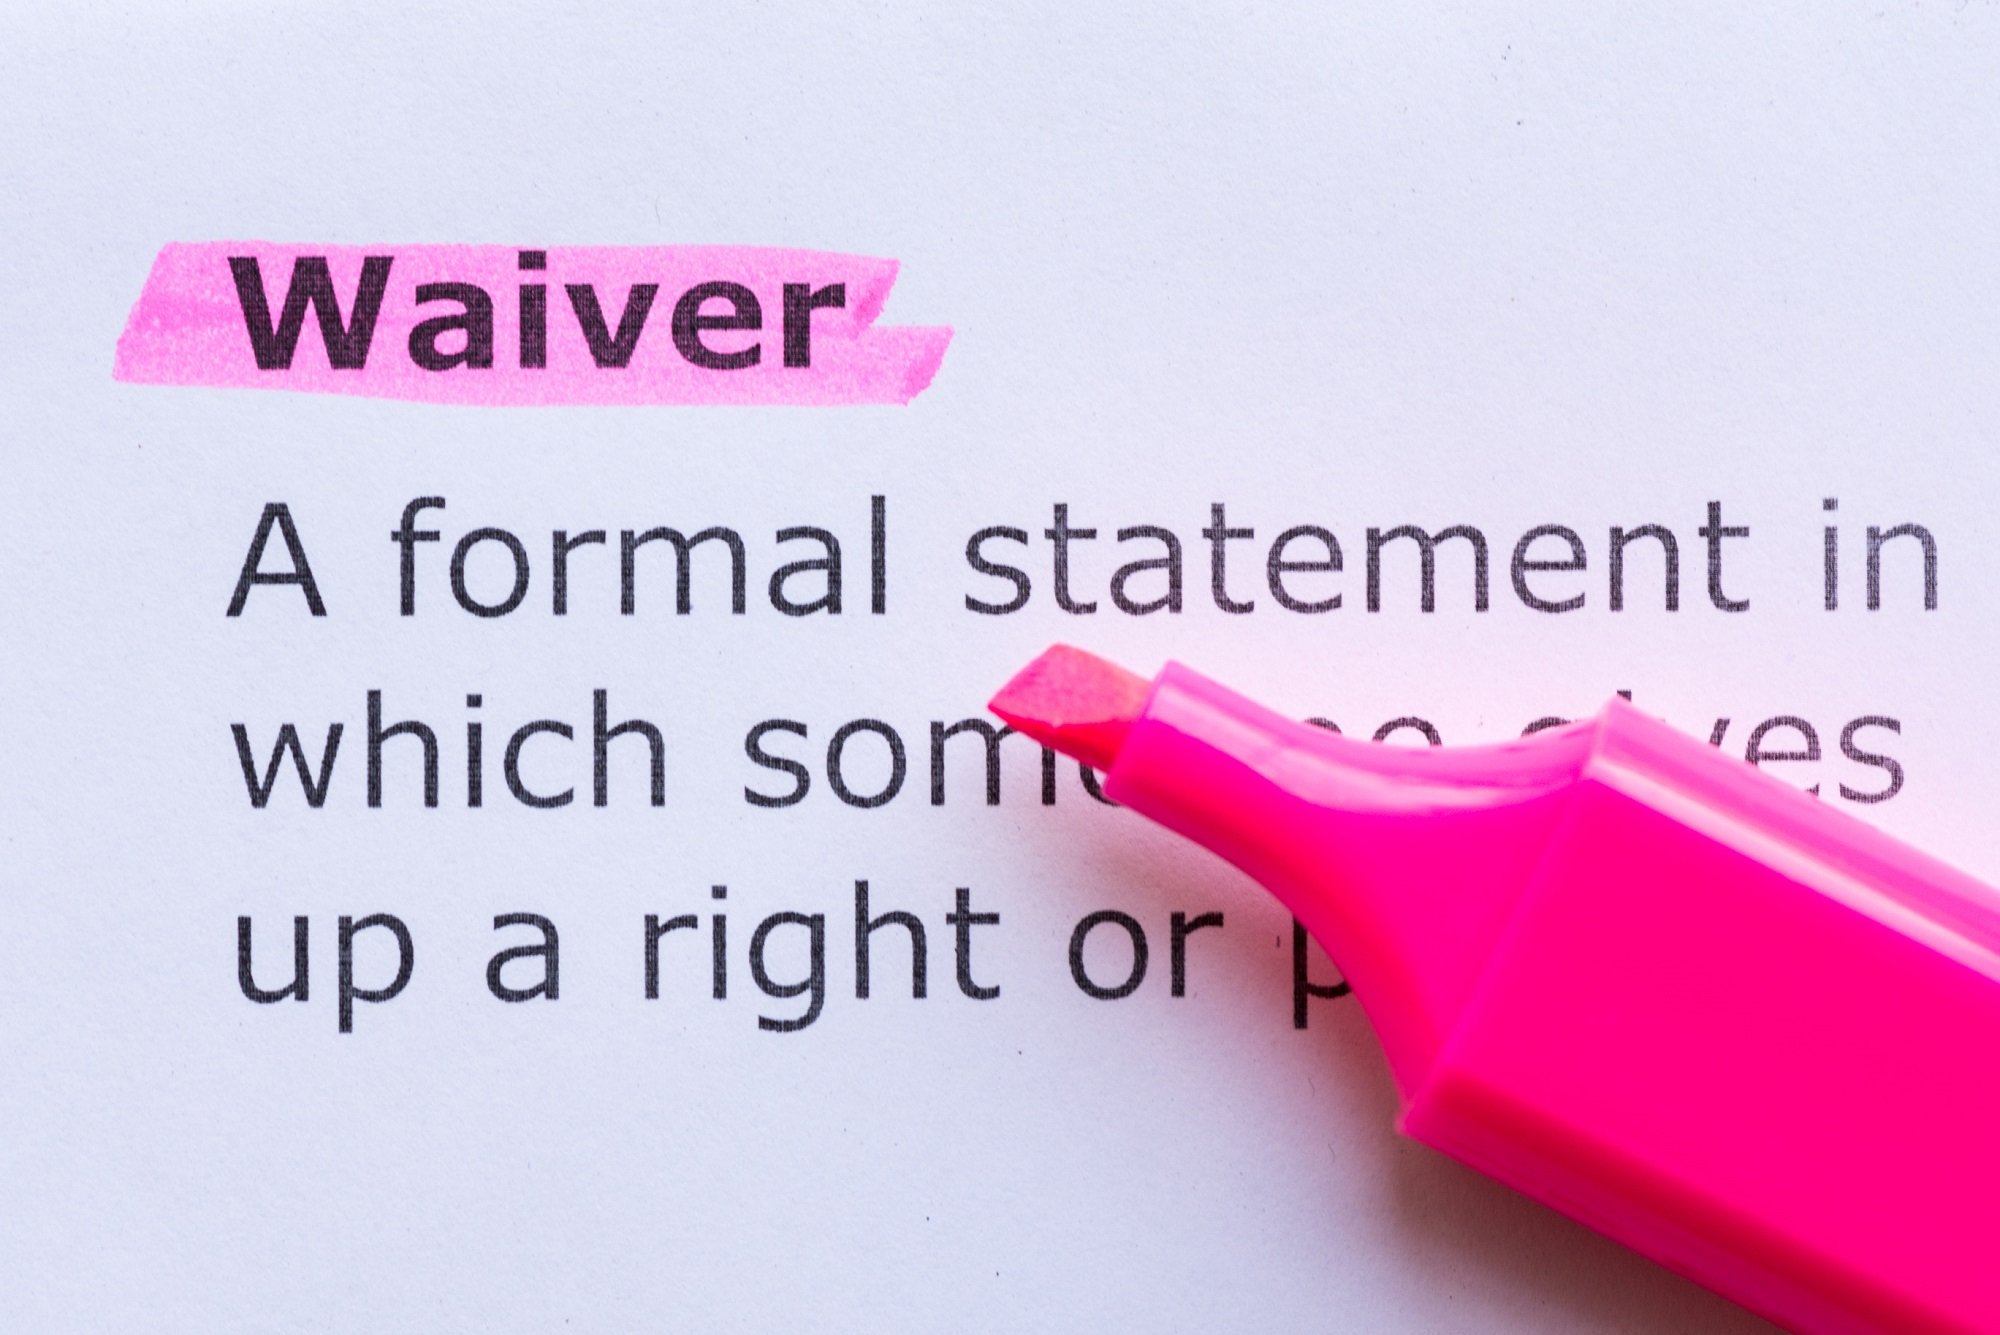 Waiver definition